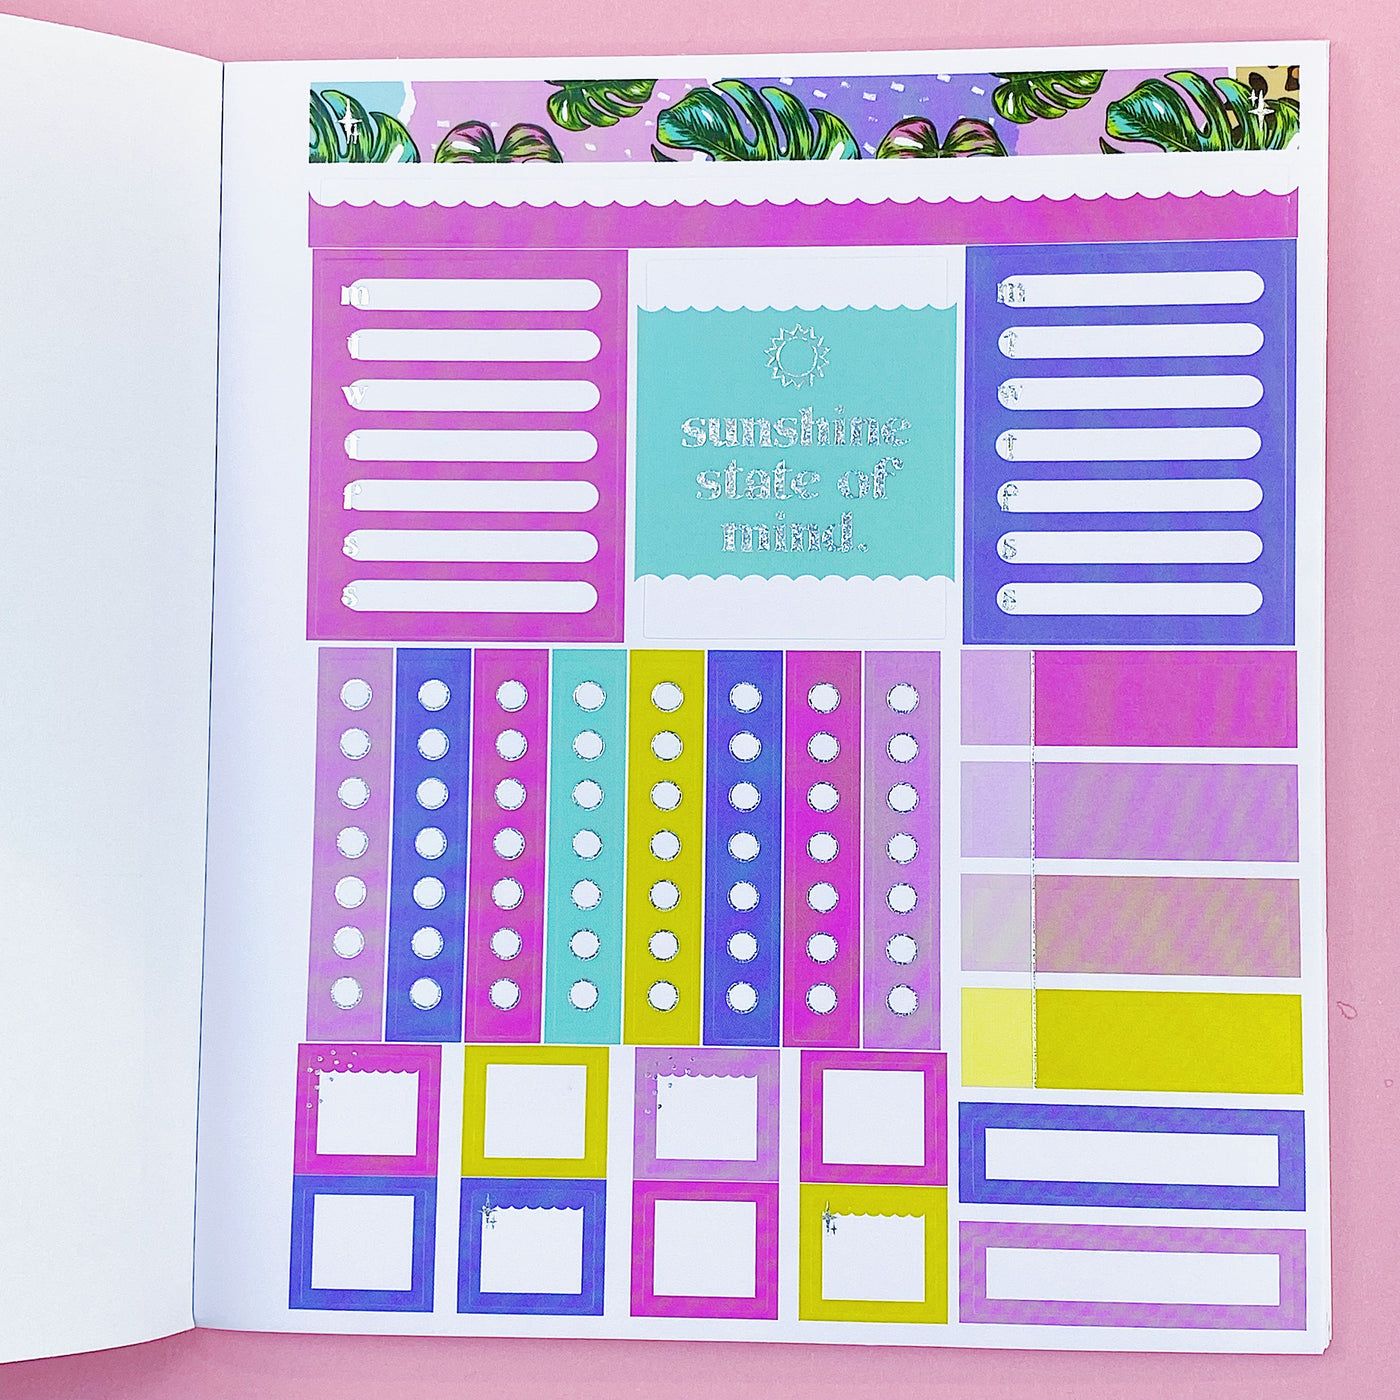 Hot Babe Summer Sticker Book | 10 Pages | Holo Foiled + Holographic Overlay